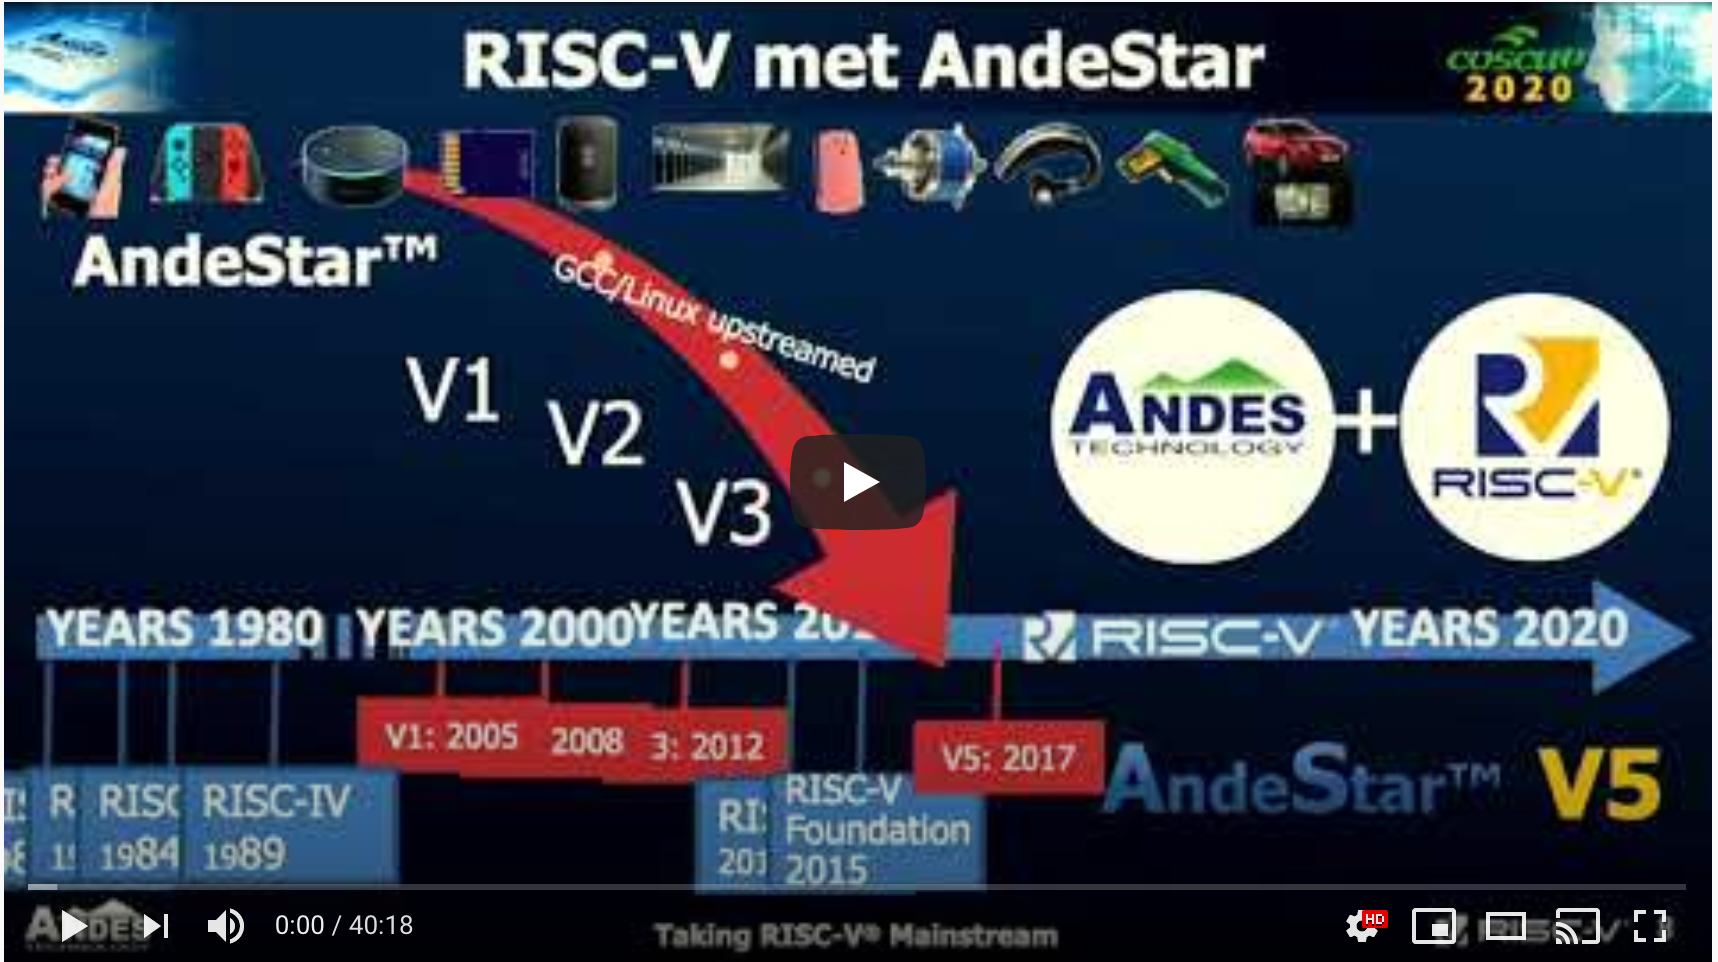 Past, Present and Future of RISC-V Open Source ISA — Andes’ Perspective by Charlie Su | COSCUP 2020 By Charlie Su | COSCUP (YouTube) – Chinese